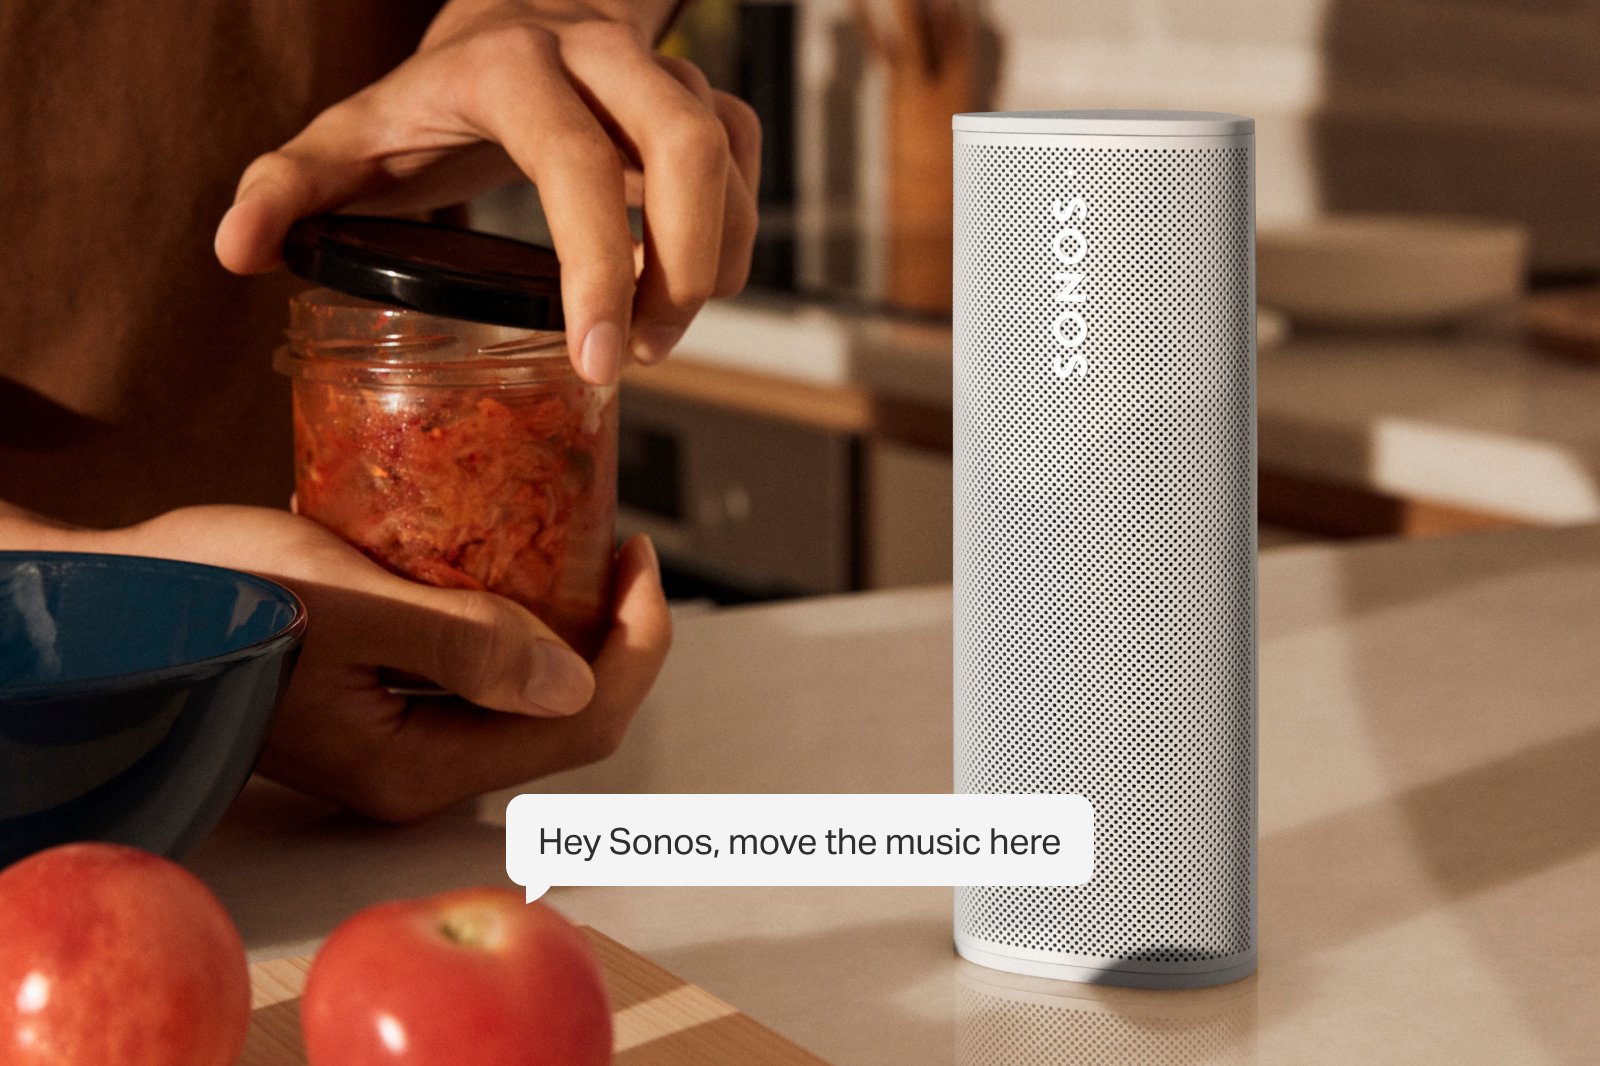 A picture of the Sonos Roam